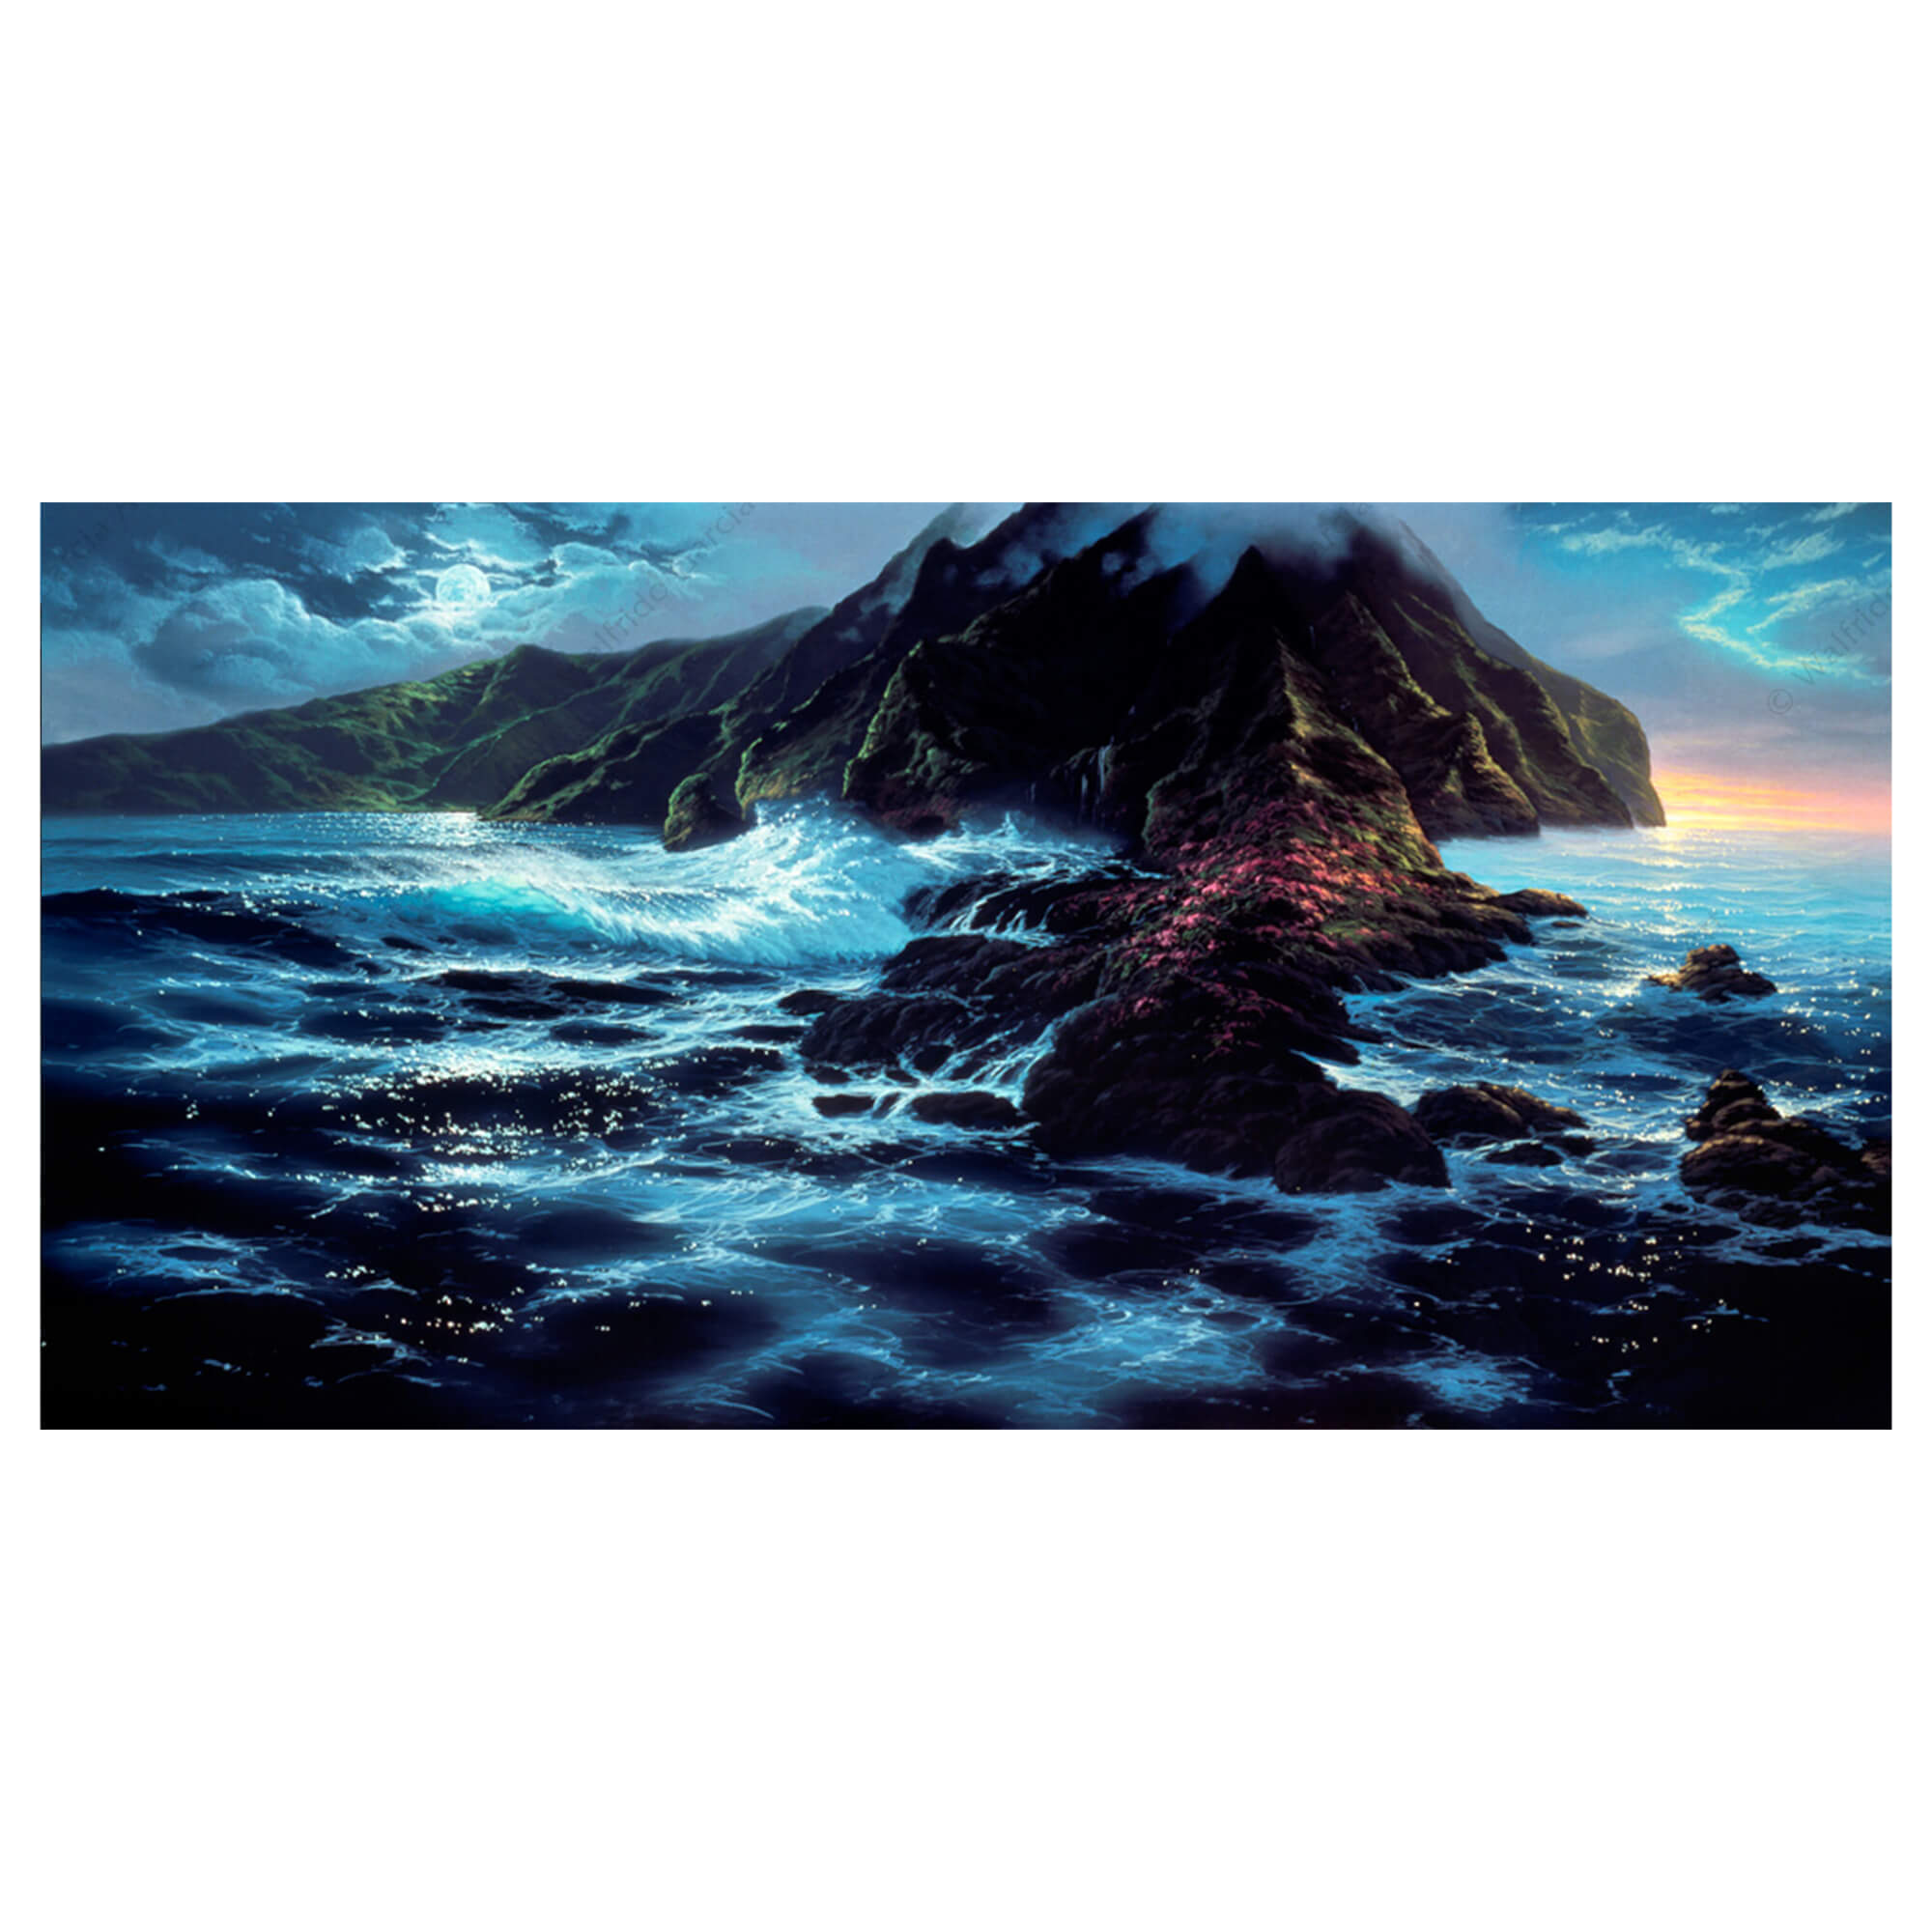 A matted art print of a churning ocean with a tropical island rising up in the distance by Hawaii artist Walfrido Garcia